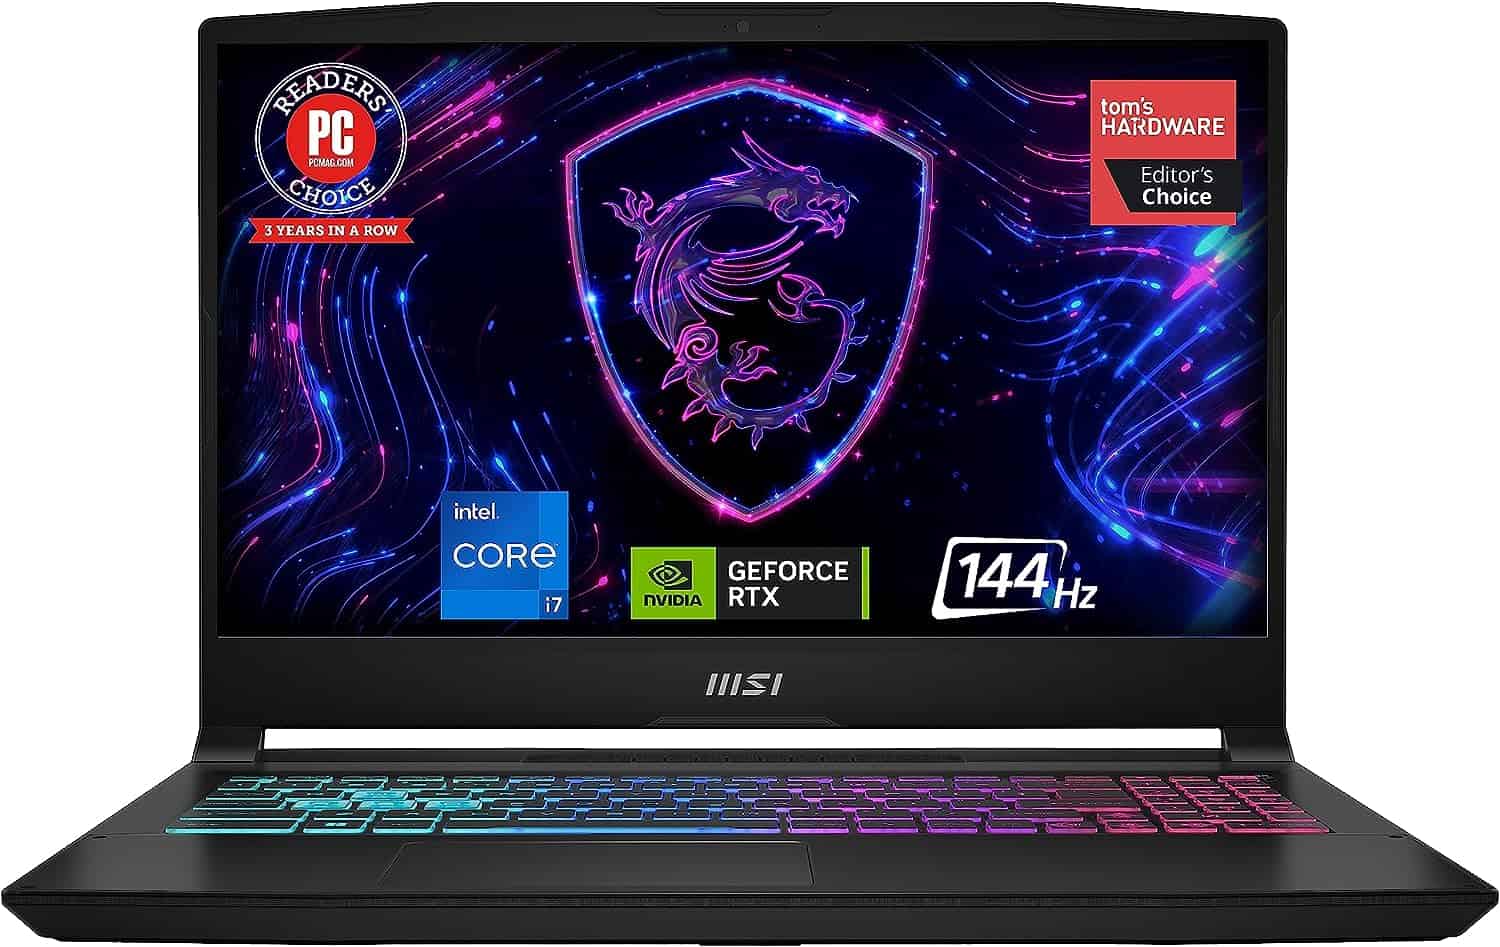 An MSI laptop featuring a dragon logo on its black exterior.